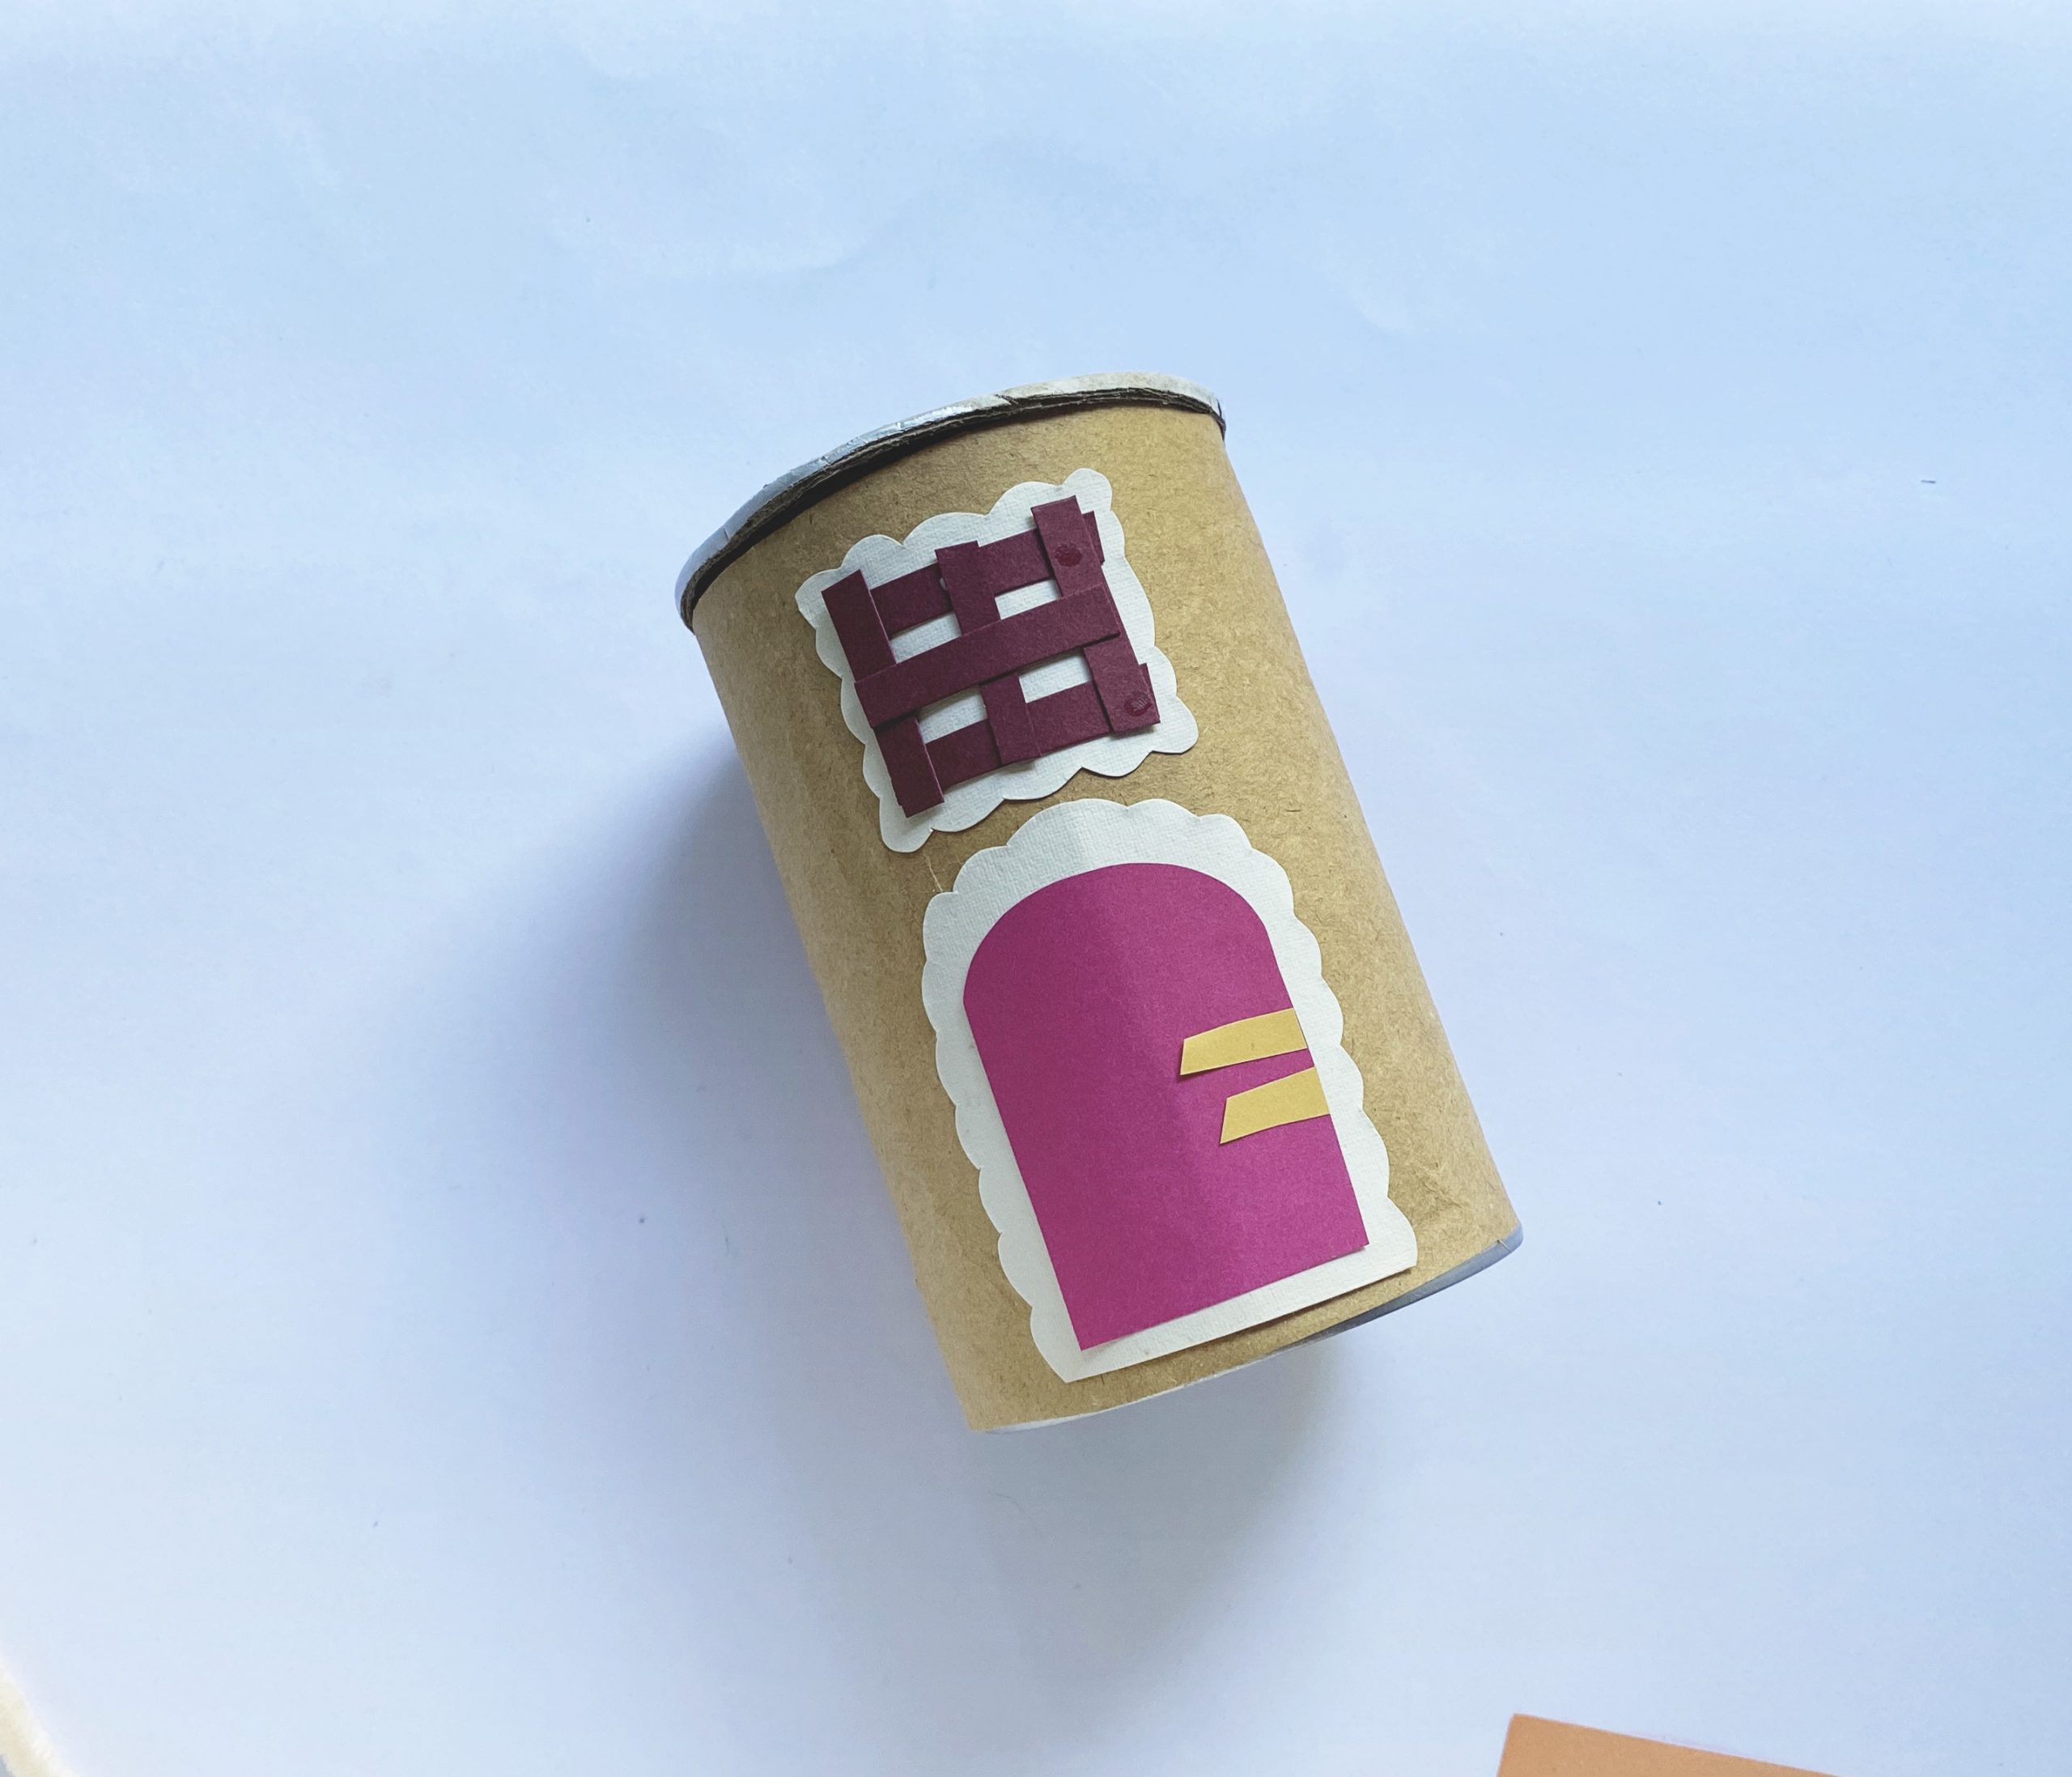 how to make a 3d gingerbread house from a pringles can